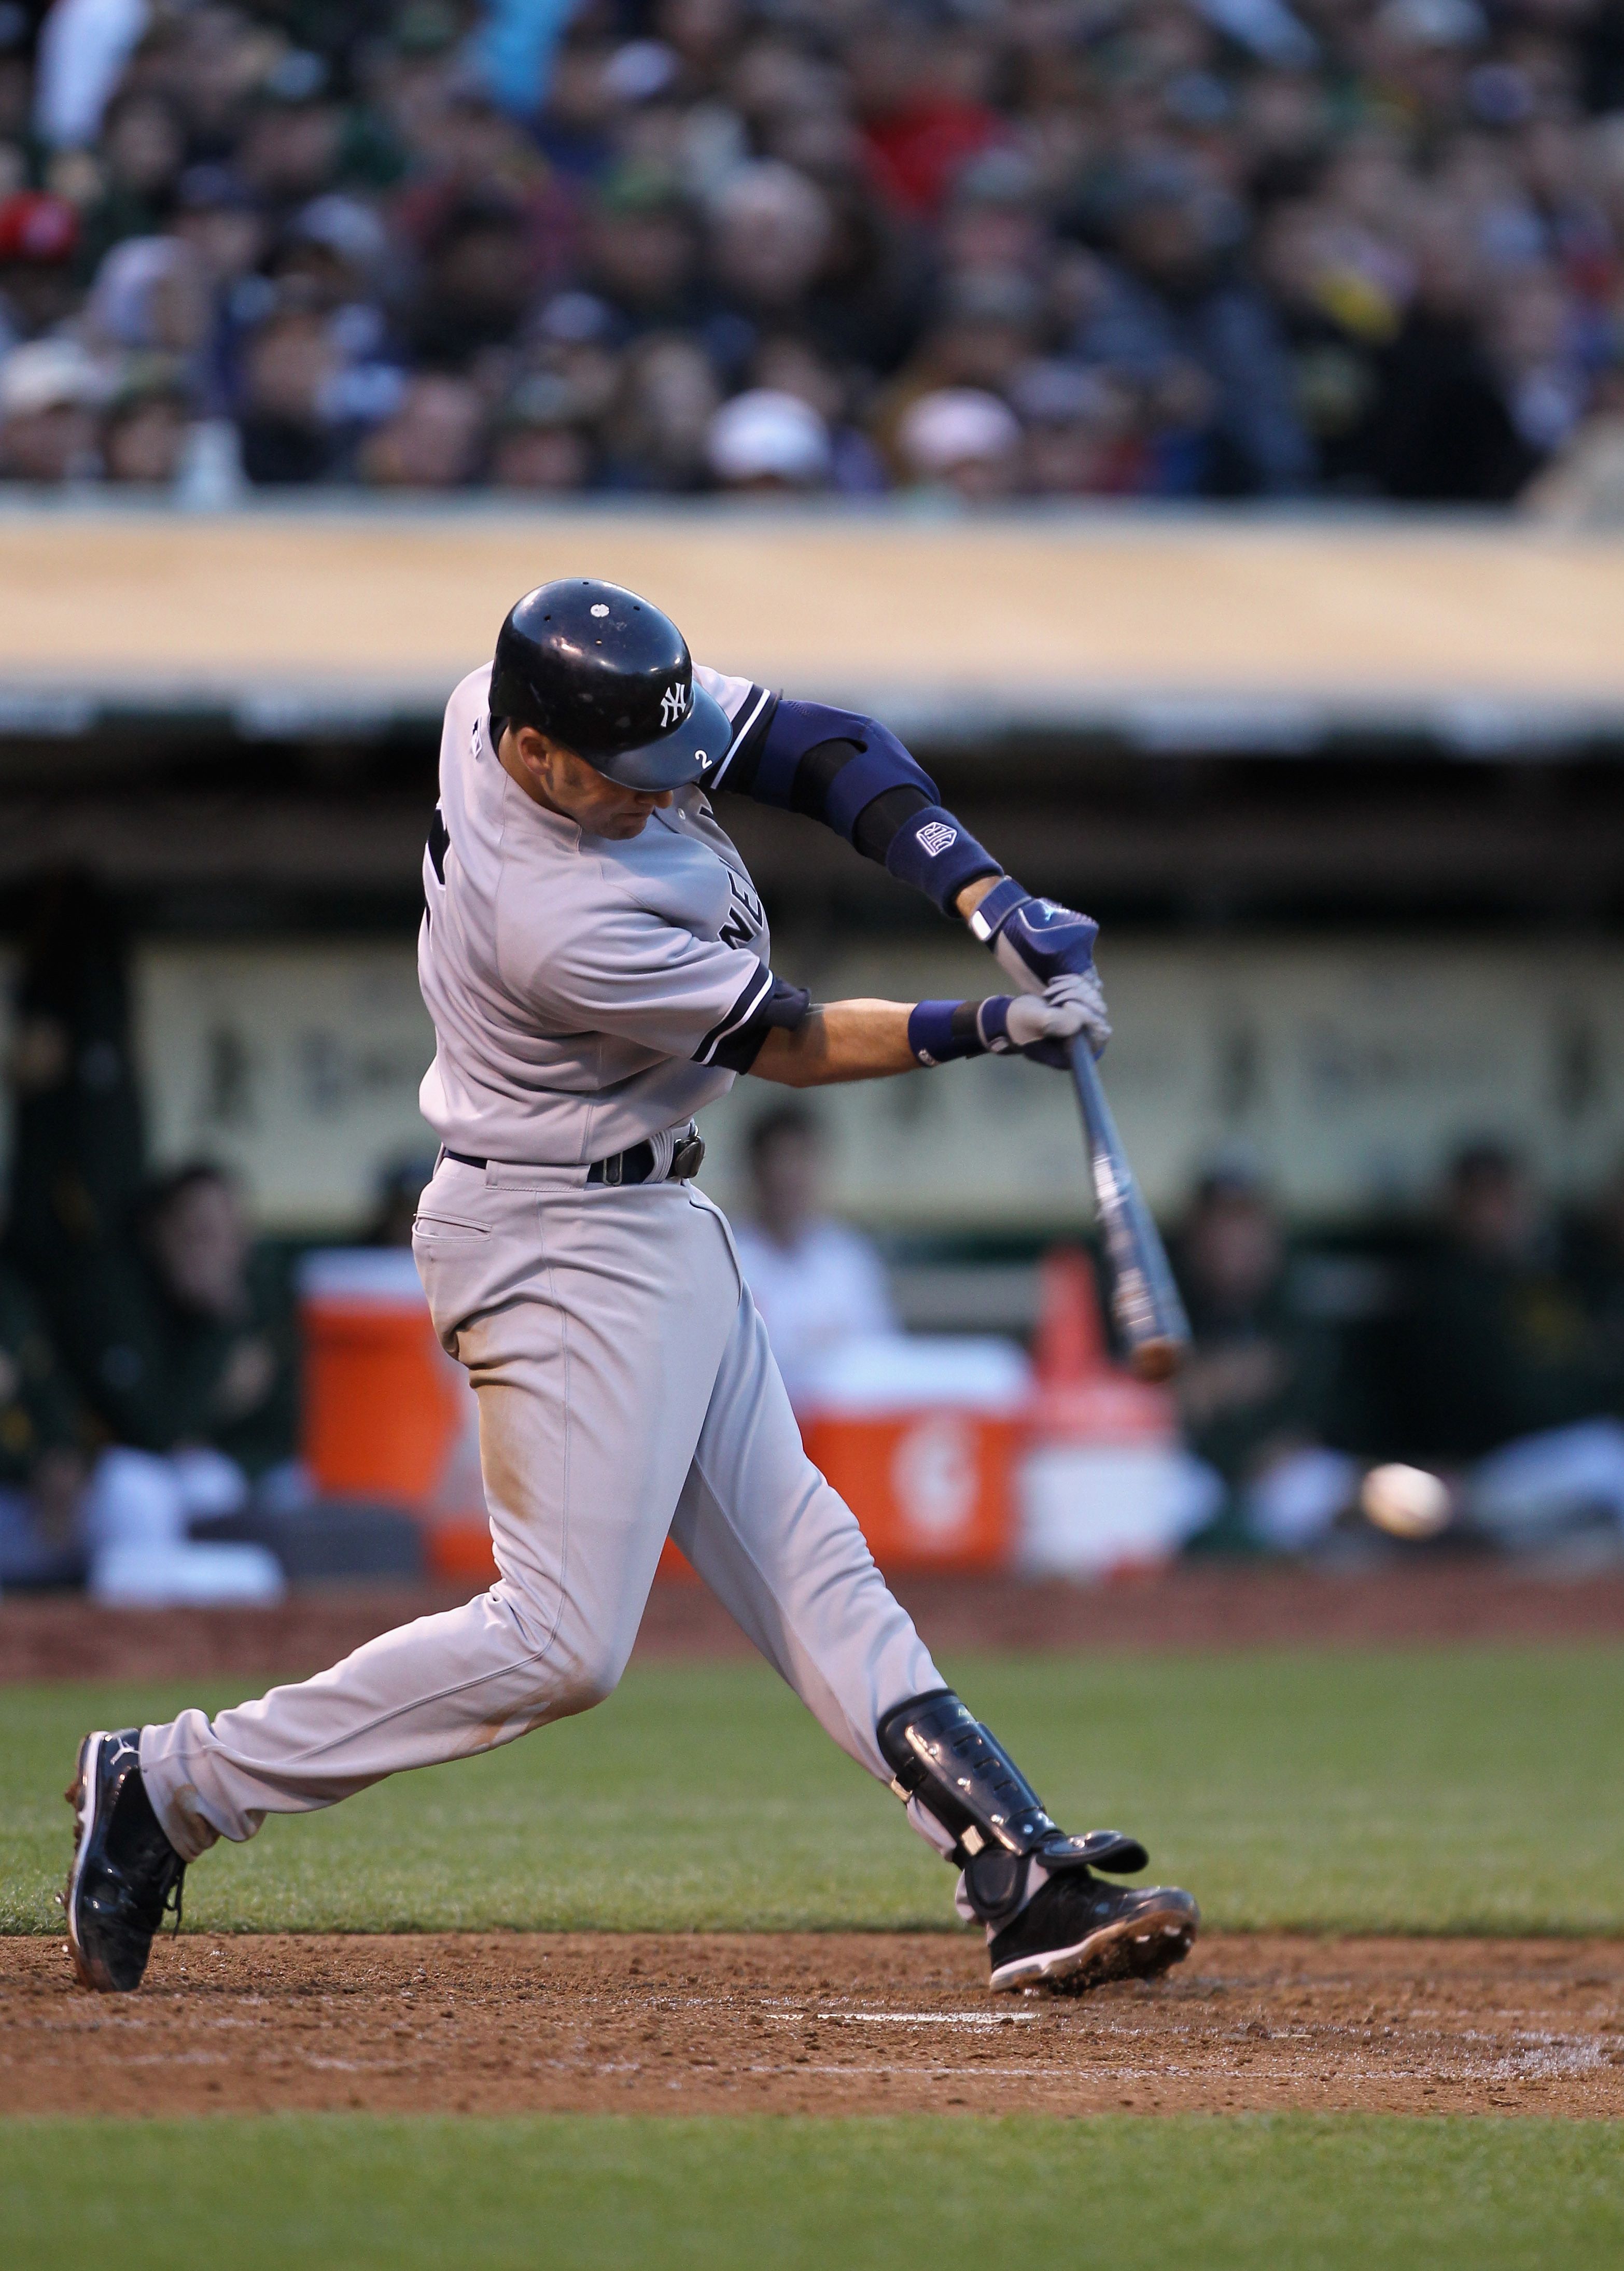 An Unconventional Look At Derek Jeter's Journey To 3,000 Hits